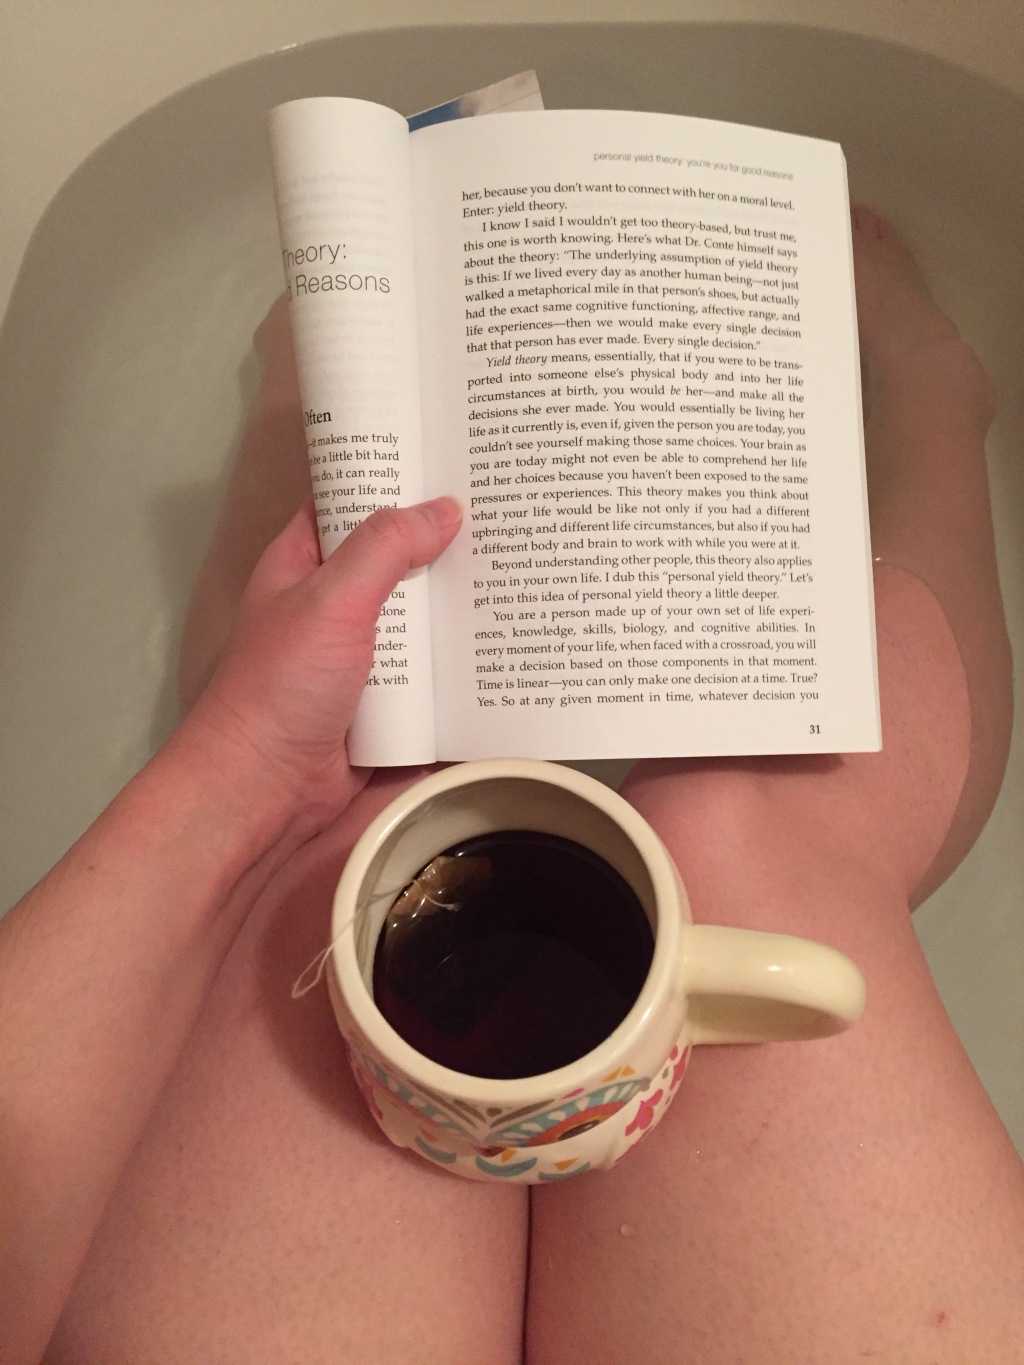 The Best Teas for Reading in the Tub + Pairings